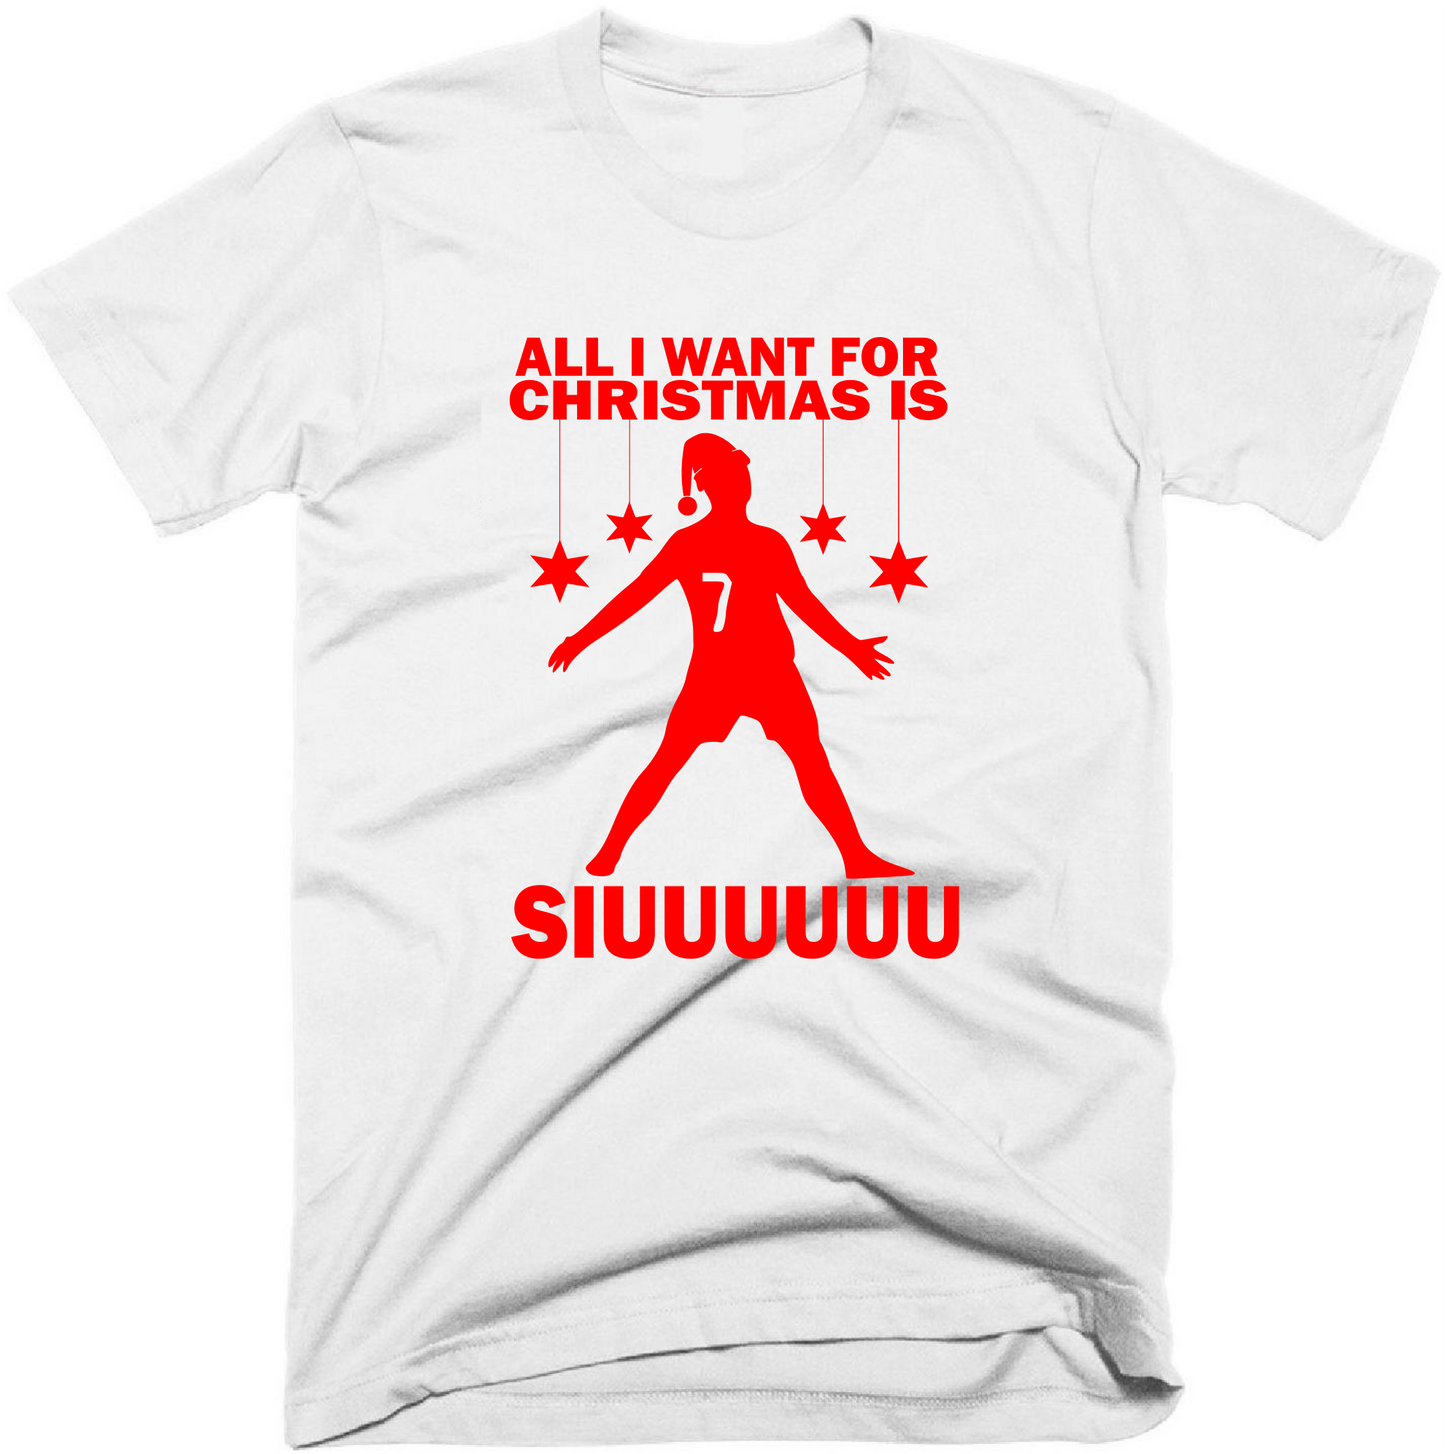 All I want for Christmas is SIUUUUU - Kids Childrens T-Shirt